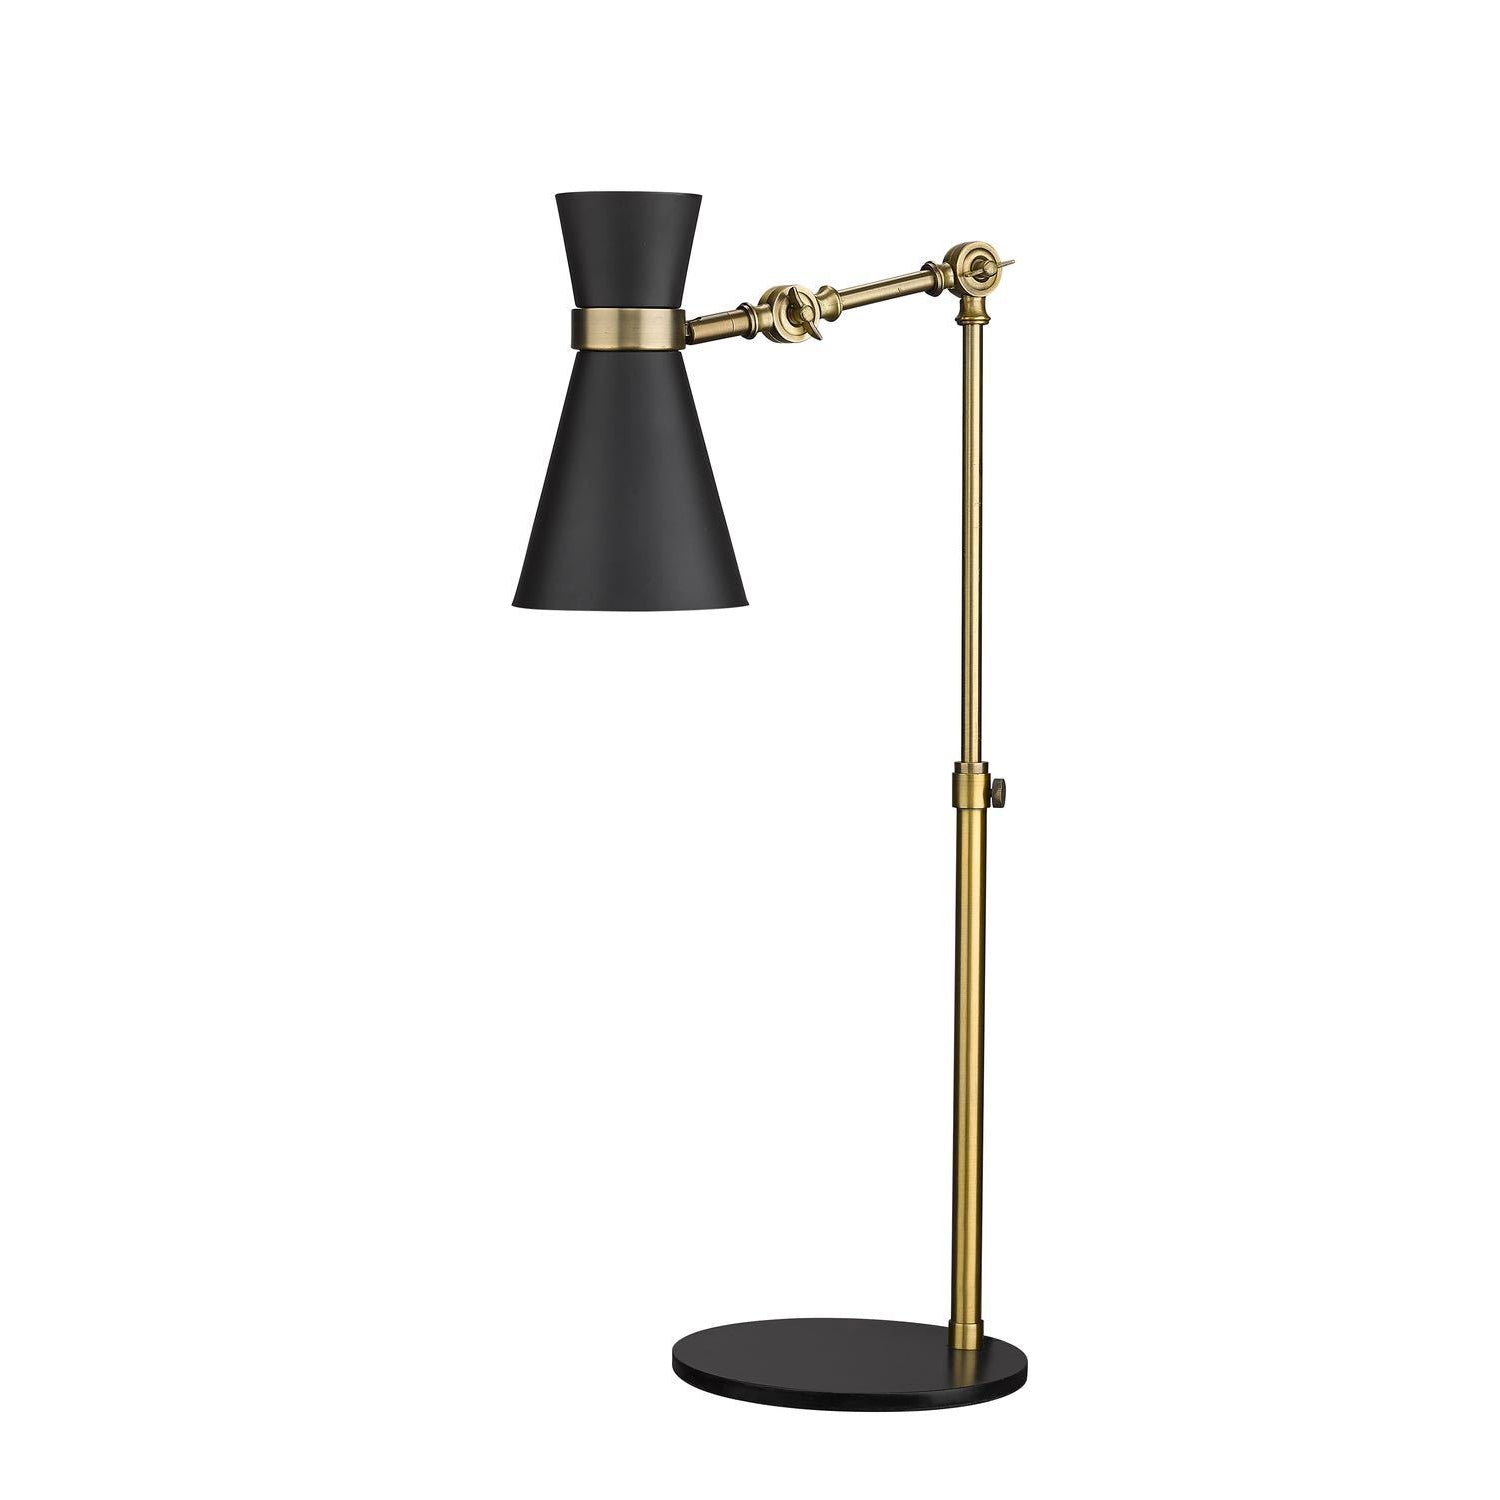 Soriano Table Lamps Matte Black + Heritage Brass